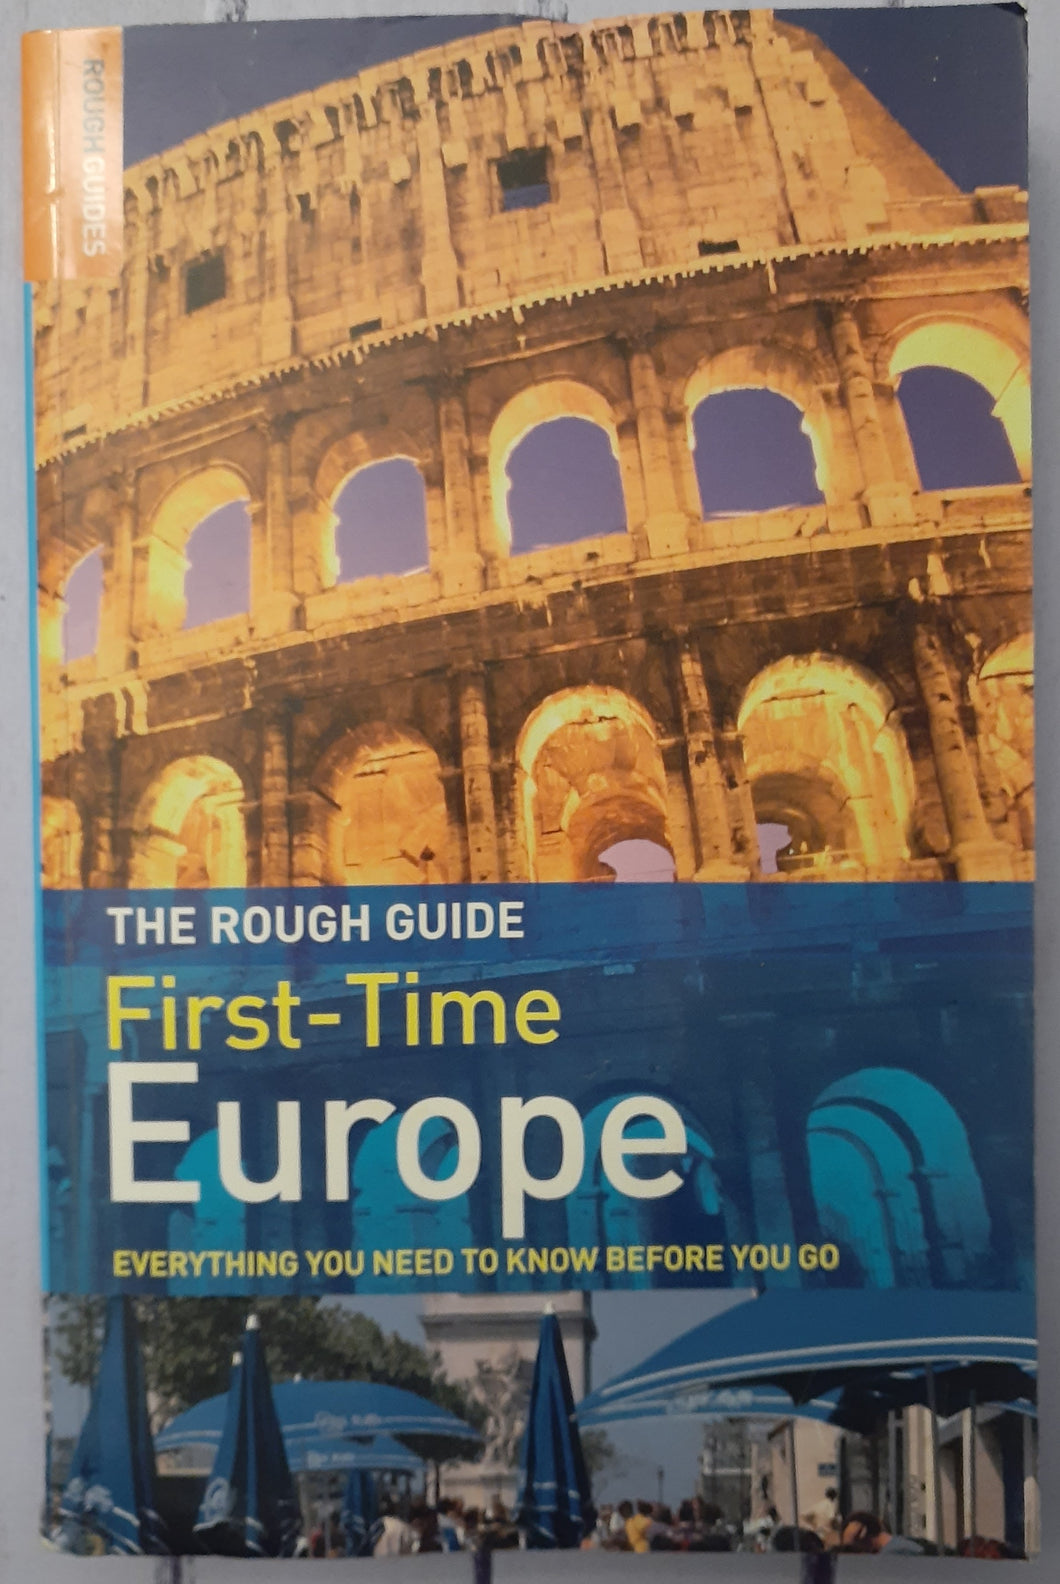 The Rough Guide First-Time Europe